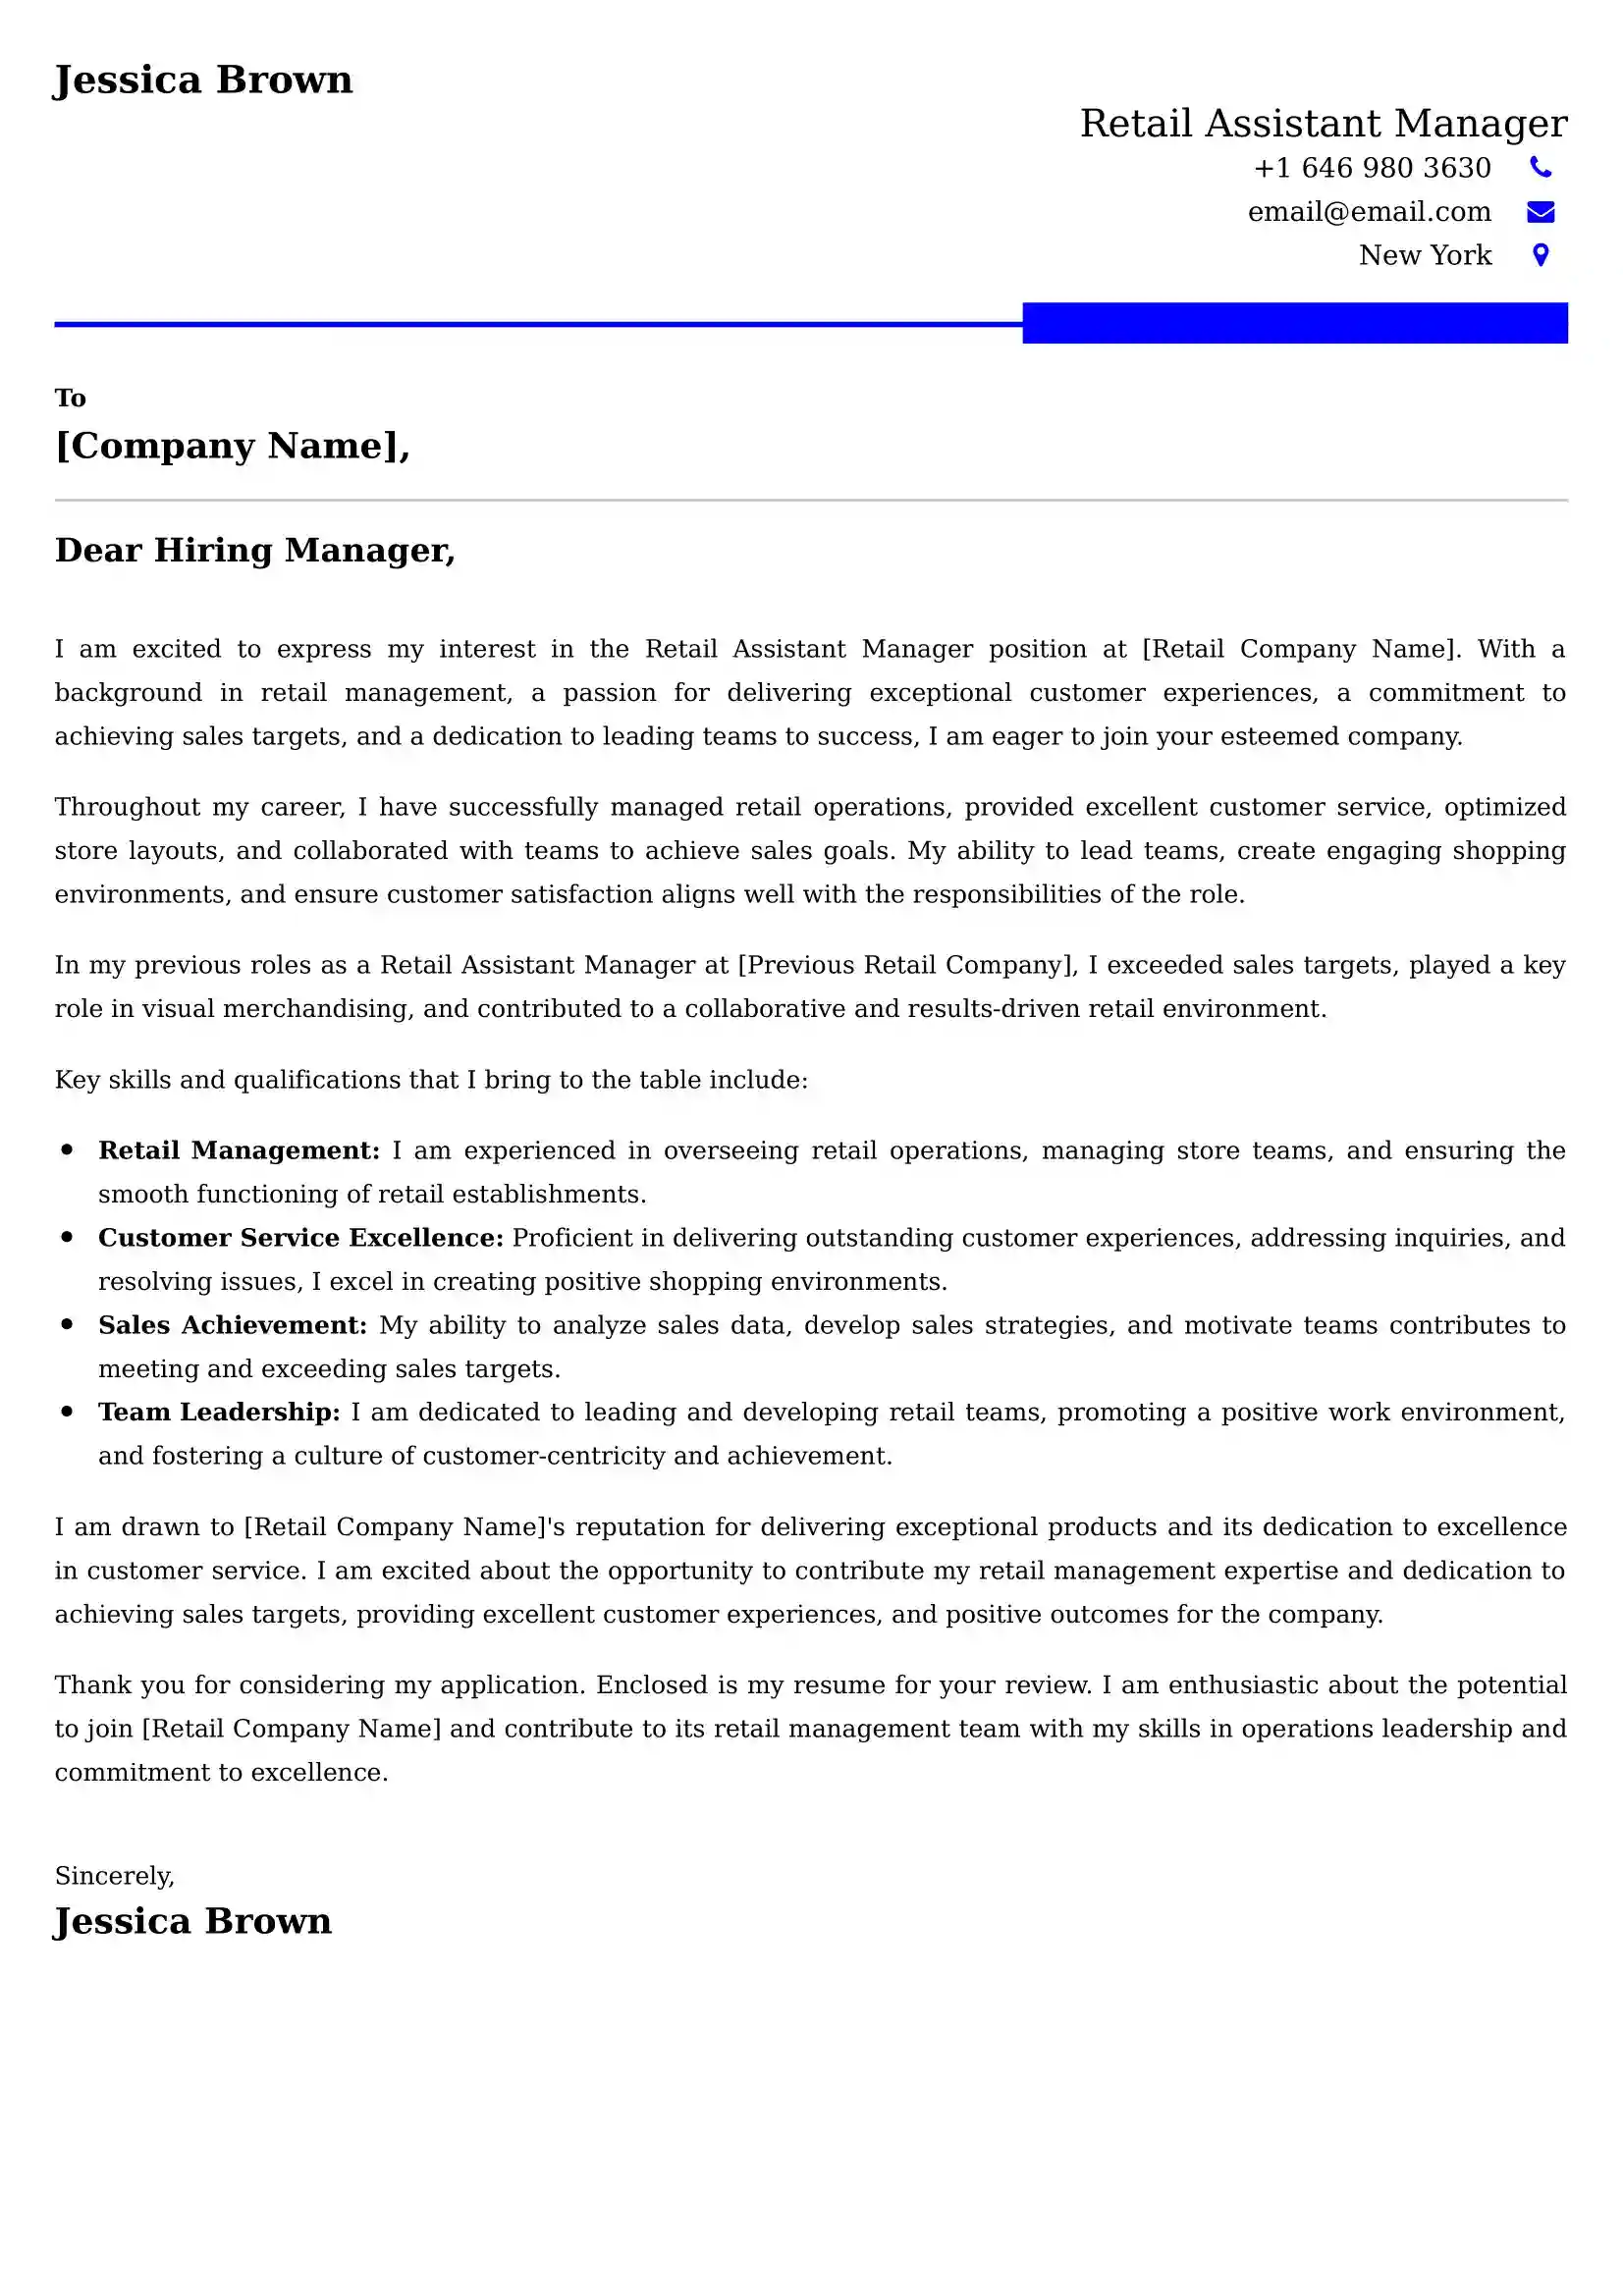 Retail Assistant Manager Cover Letter Examples - US Format and Tips